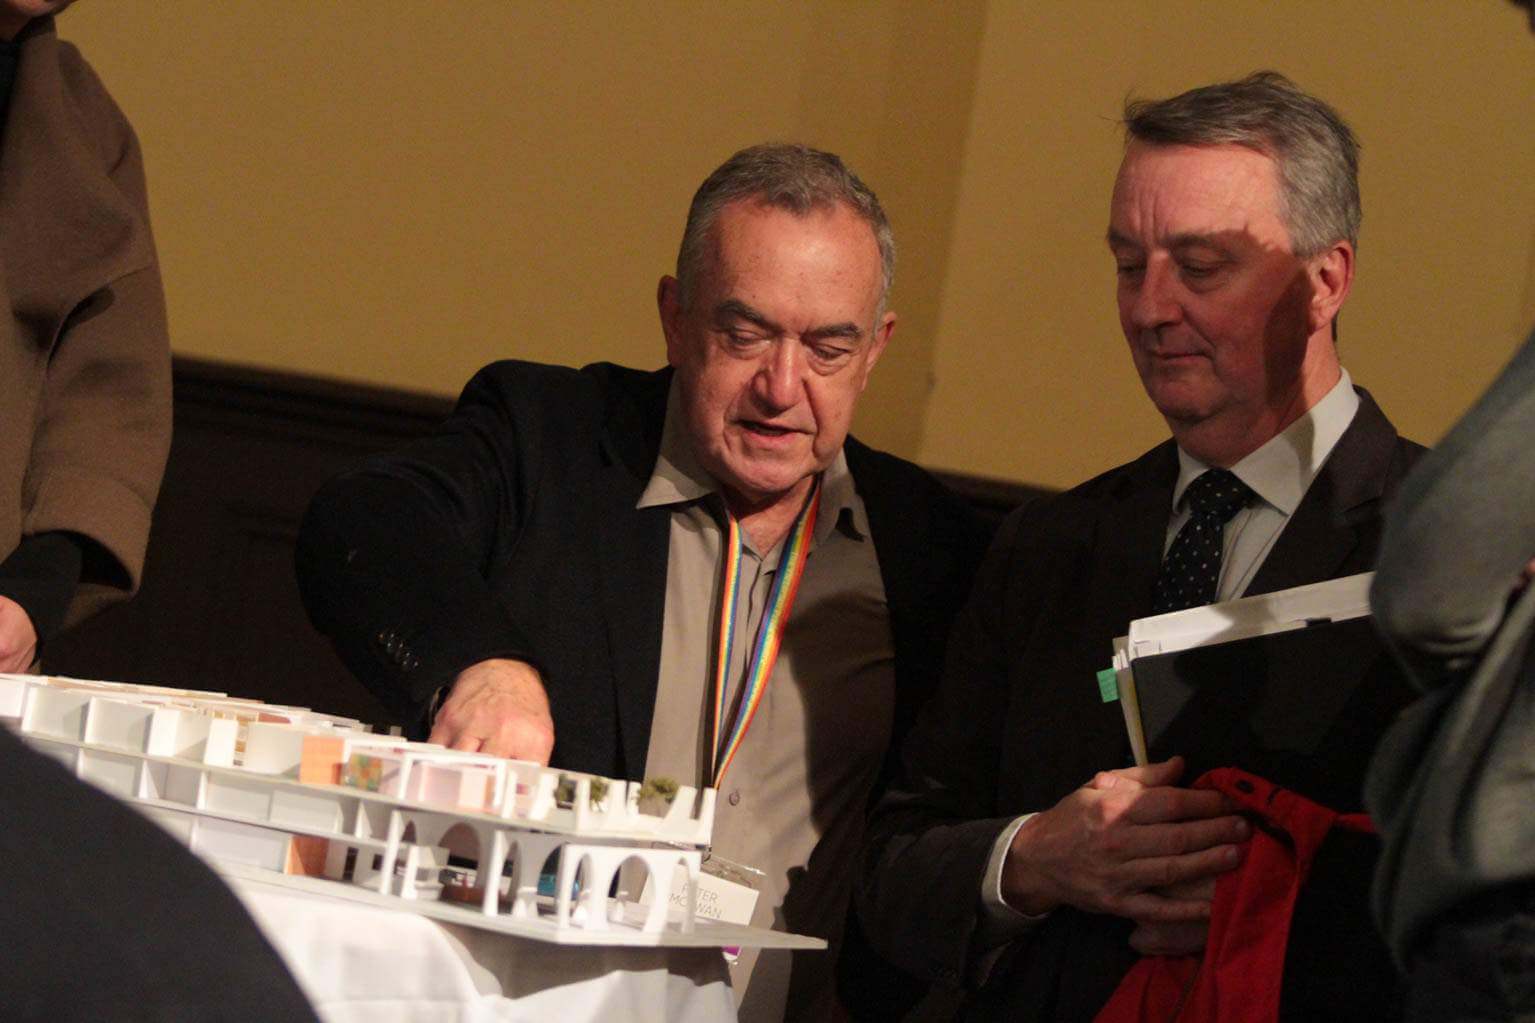 Minister Foley and Peter McEwan looking at the a 3D model of the Pride Centre